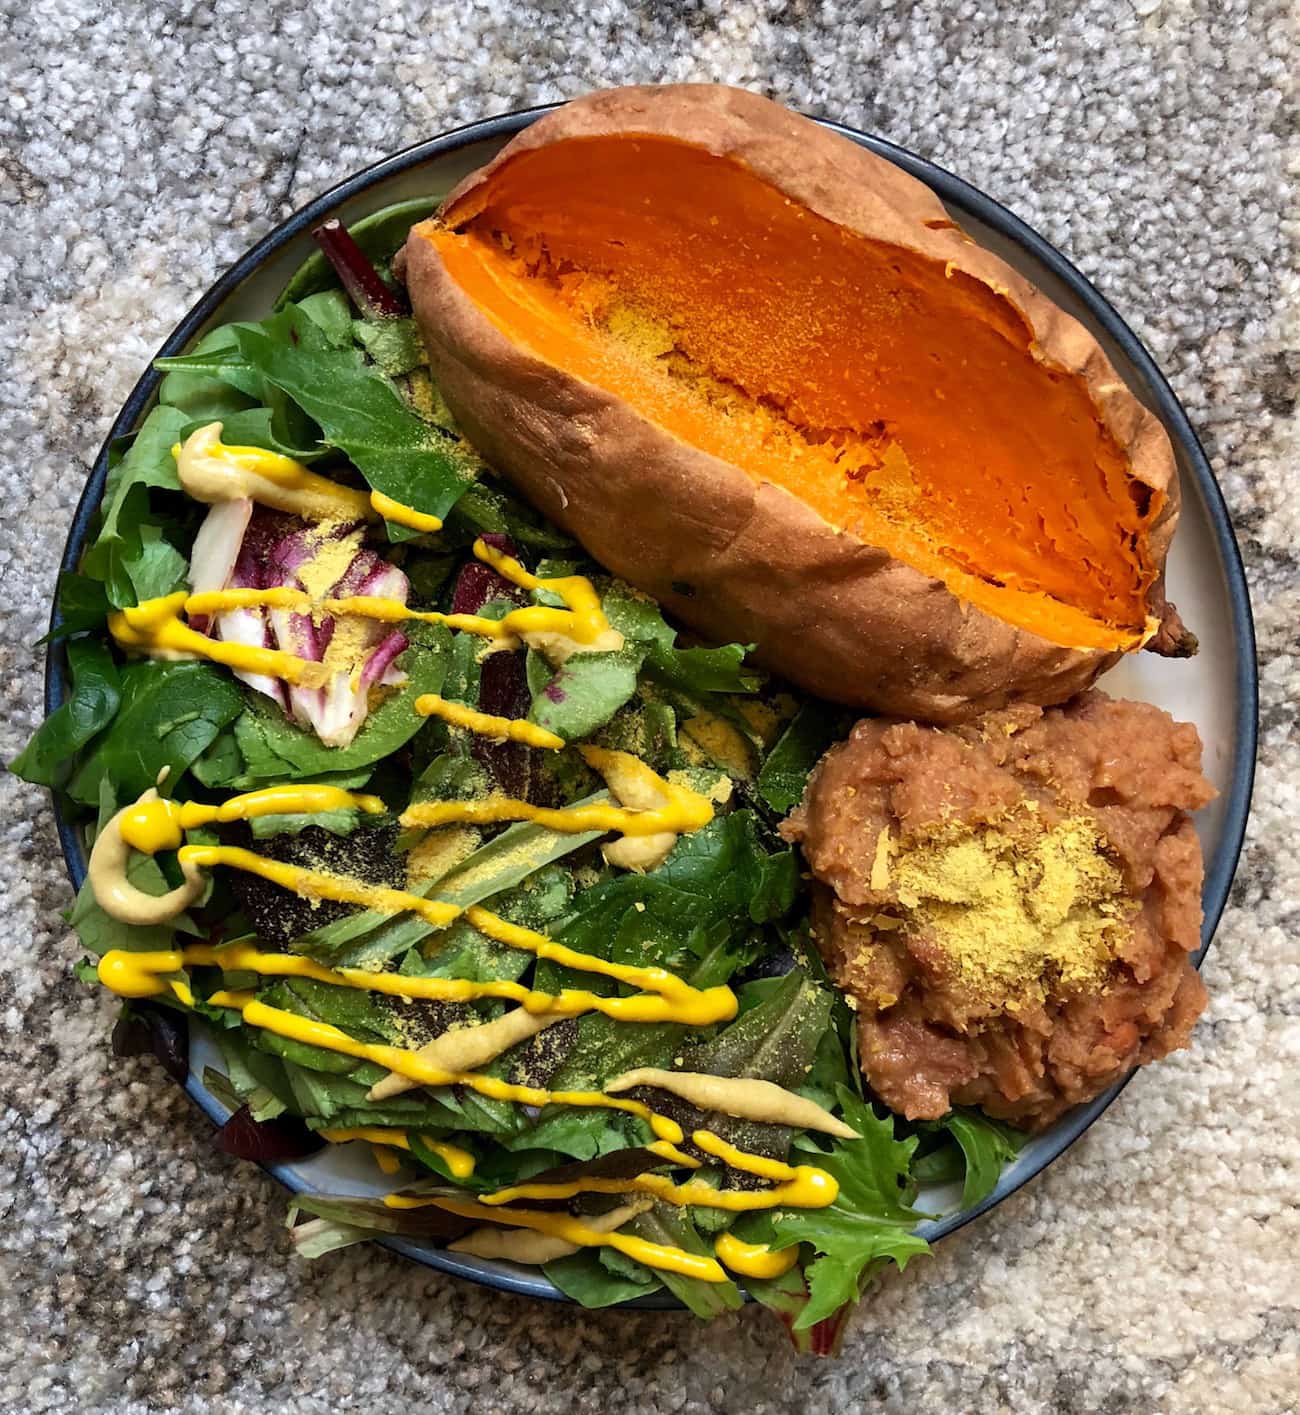 Baked sweet potato with side salad and refried beans